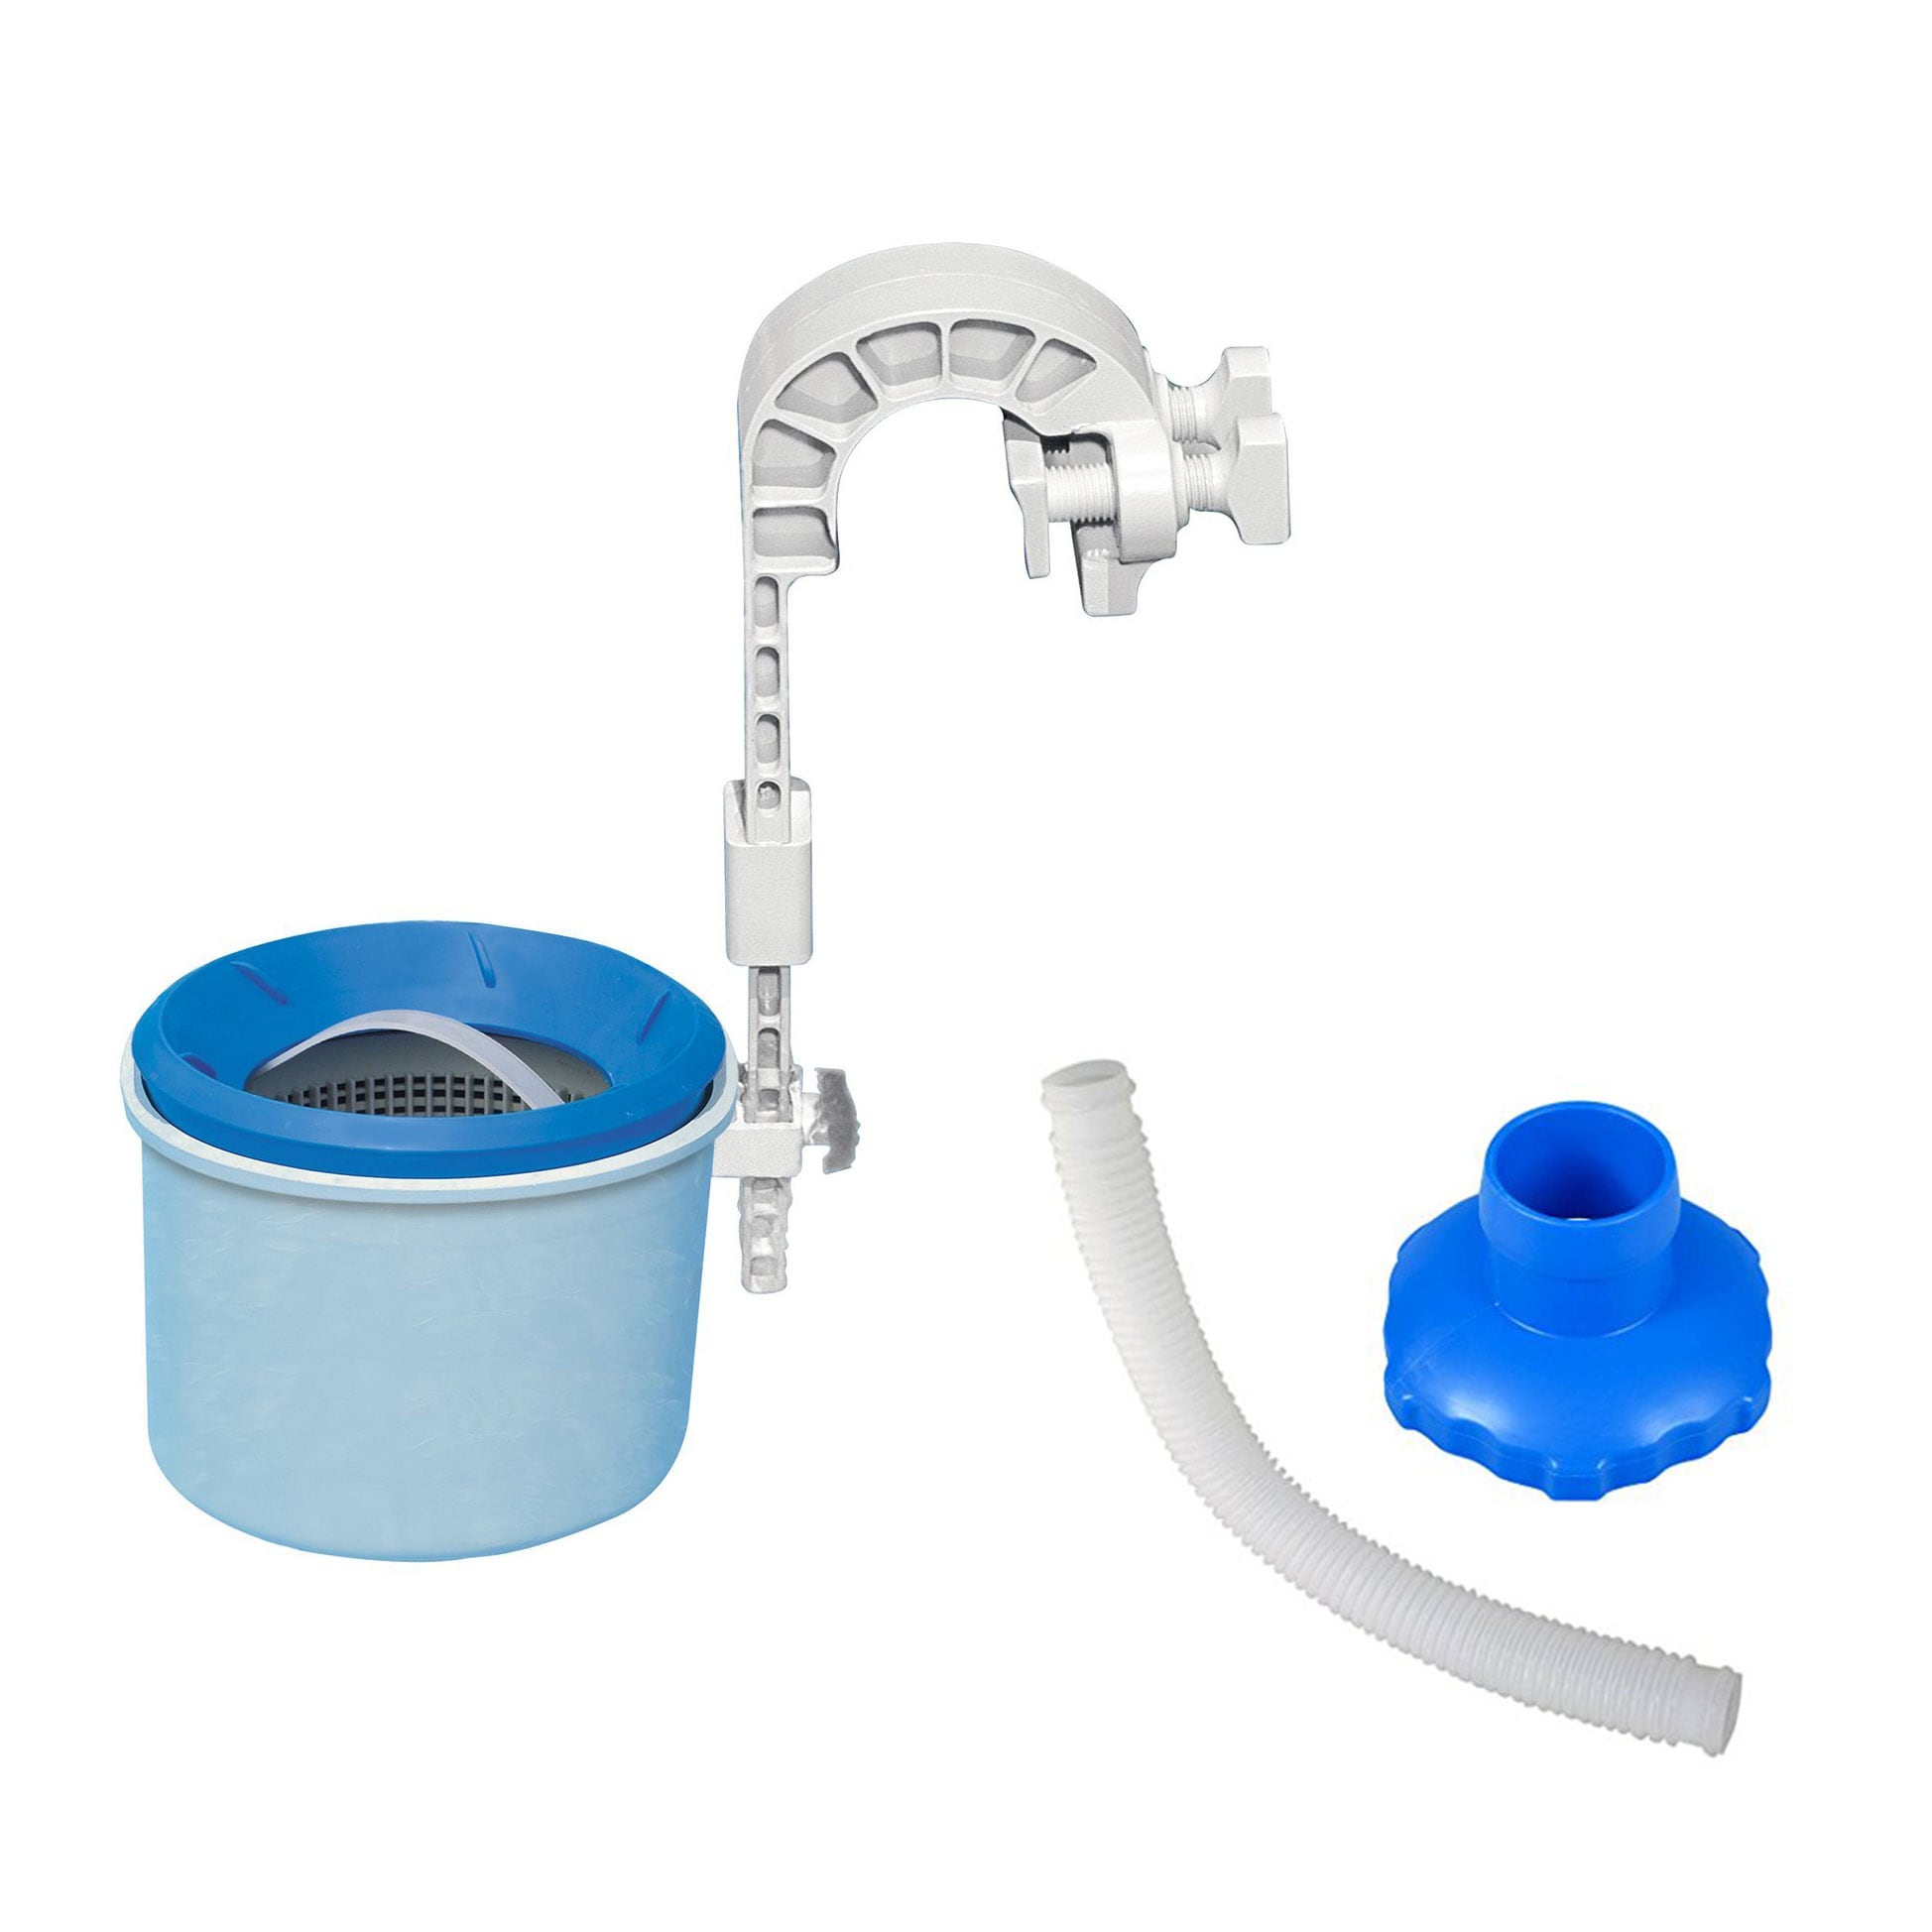 Intex Pool B Skimmer Skimmer at Deluxe Mount Wall Replacement department and the Above-Ground Pools in with for Adapter Hose Parts Systems Auto